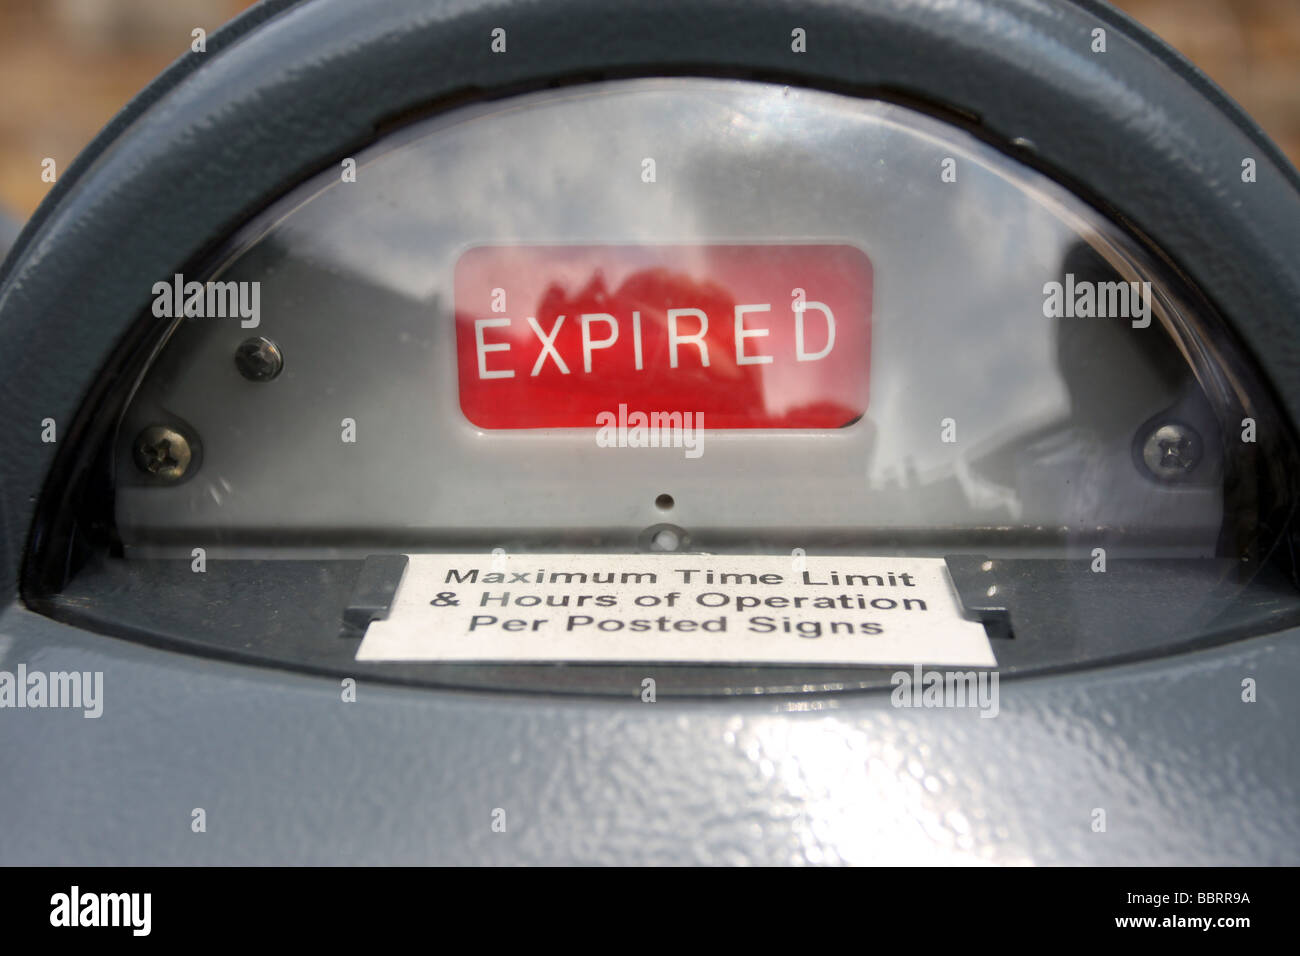 Expired parking meter in New Haven CT USA Stock Photo